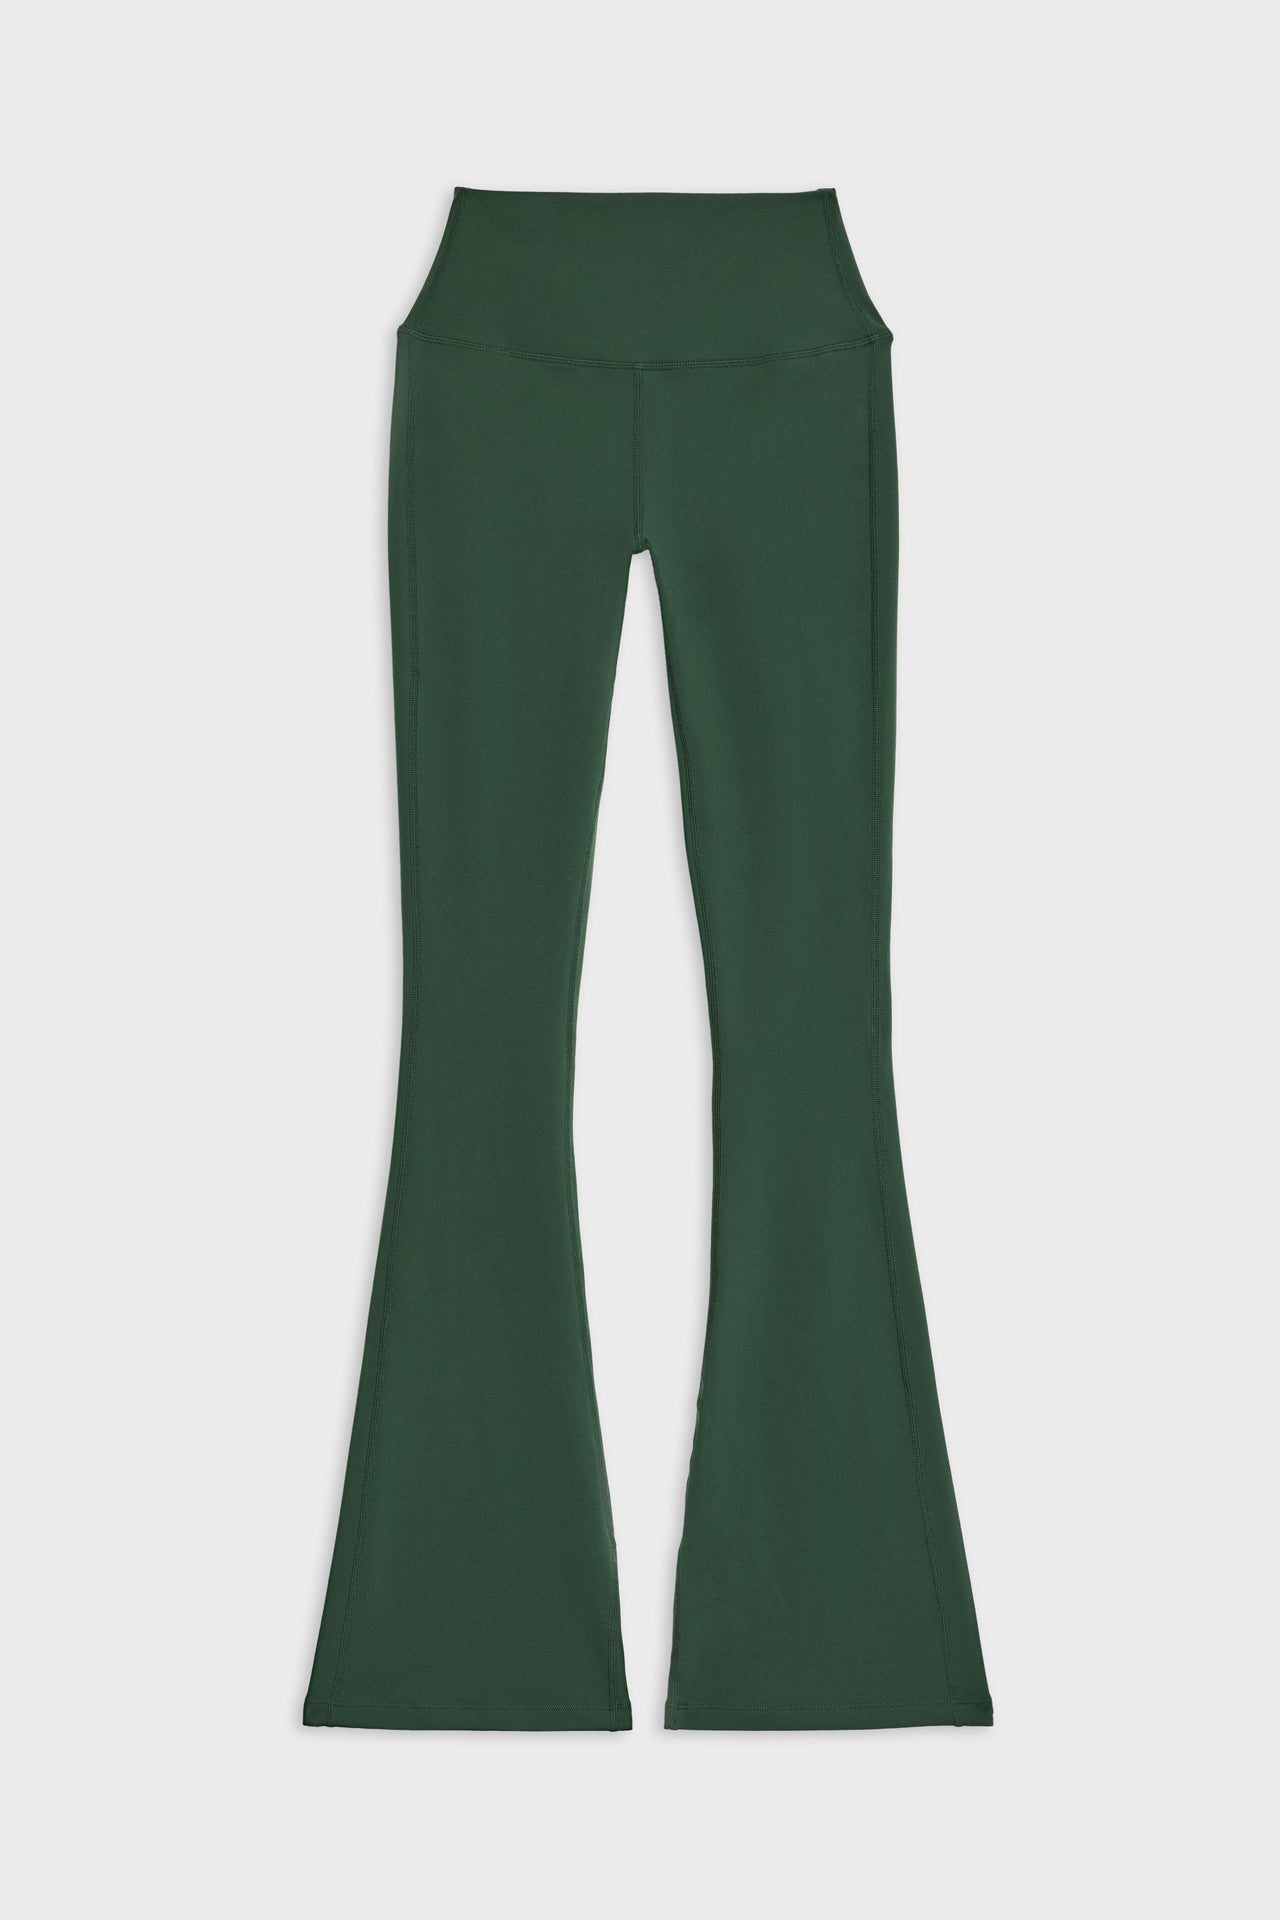 Front flat view of dark green high waist below ankle length legging with wide flared bottoms 